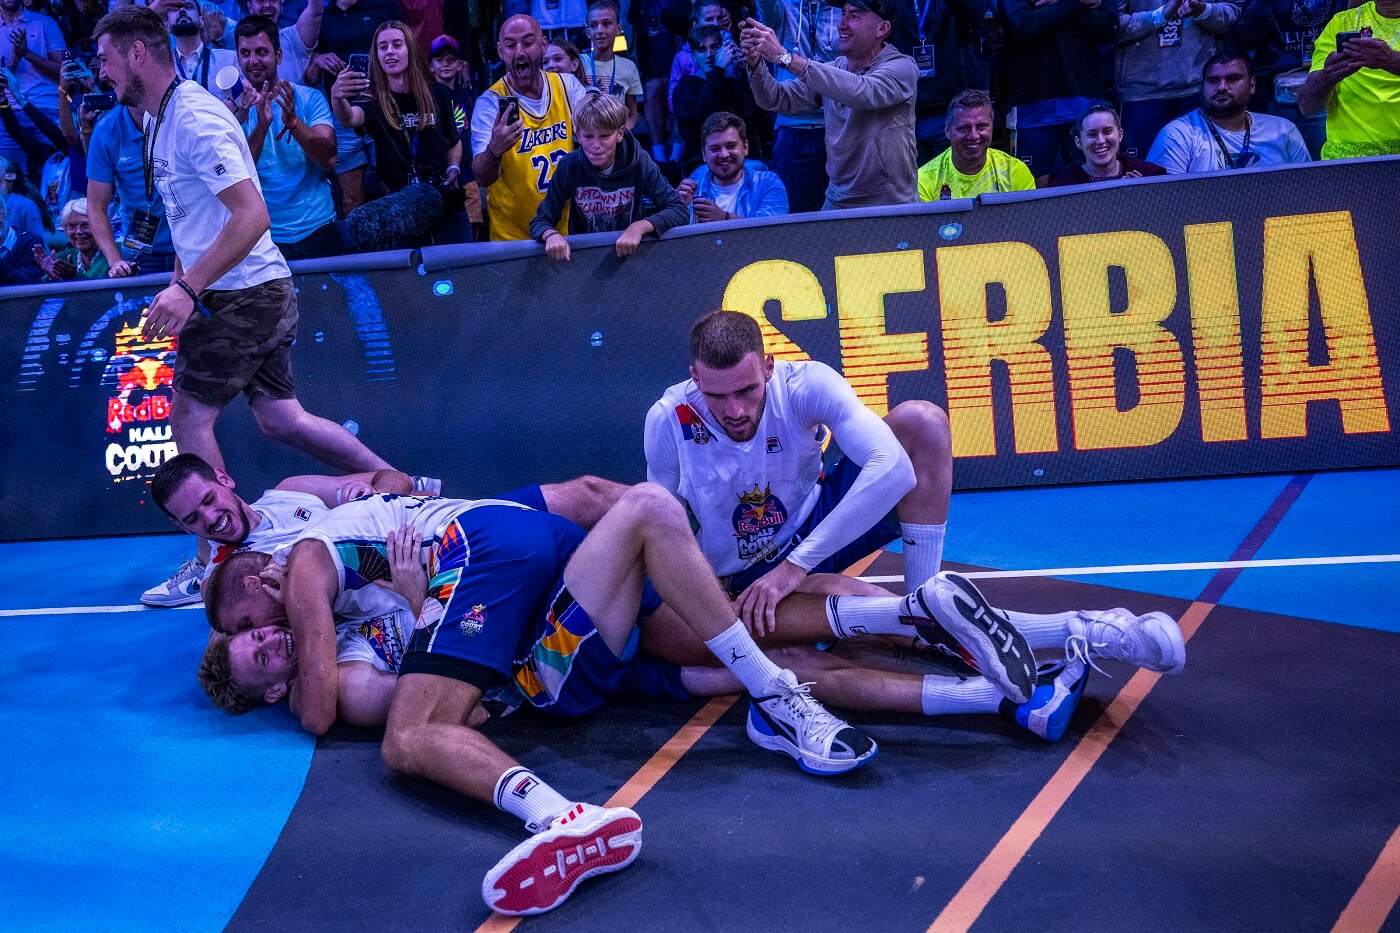 Participants compete during the Red Bull Half Court World Final in Belgrade, Serbia on September 17, 2023.